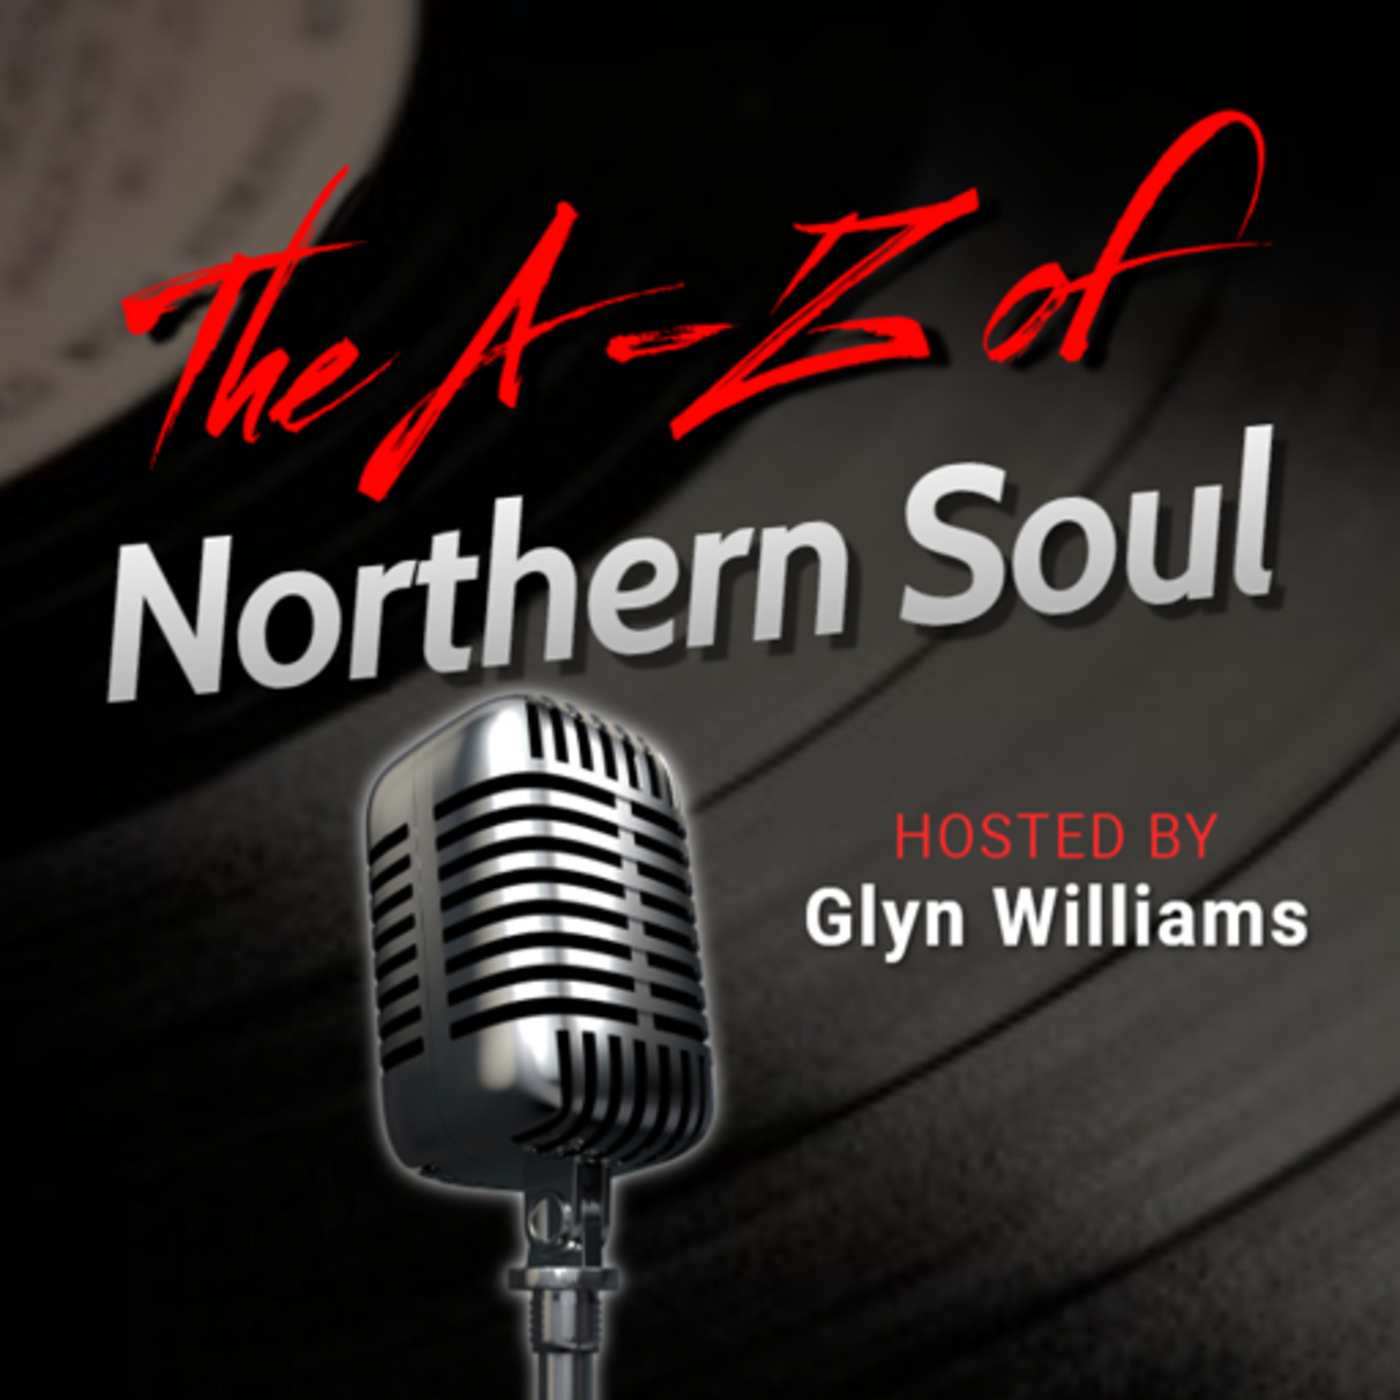 The A-Z of Northern Soul E071